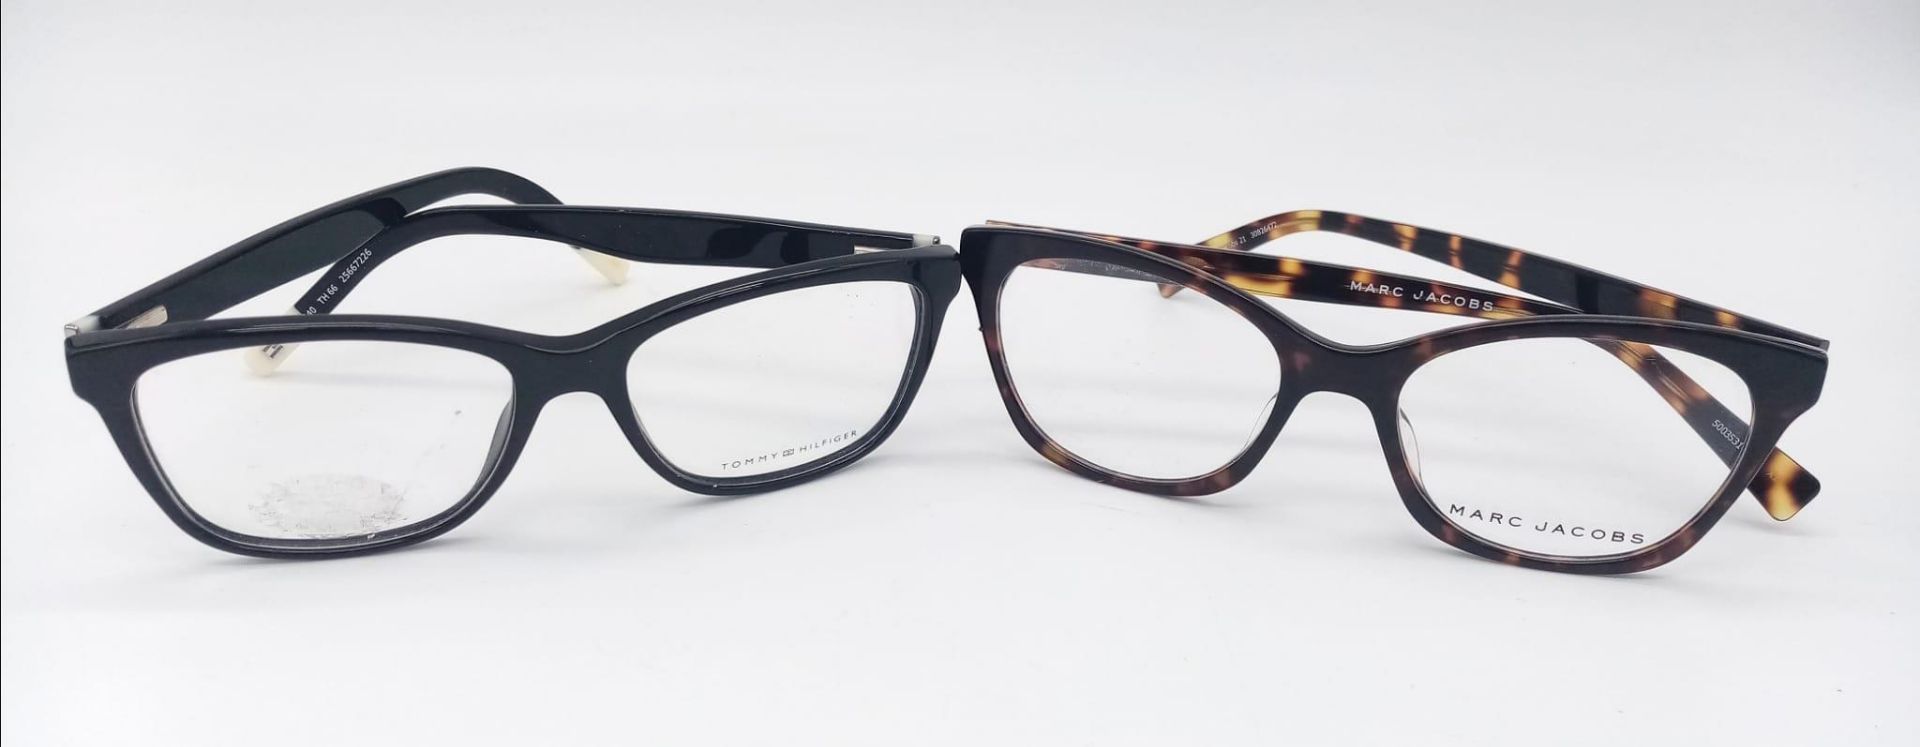 Two Pairs of Designer Glasses - Marc Jacobs and Tommy Hilfiger.